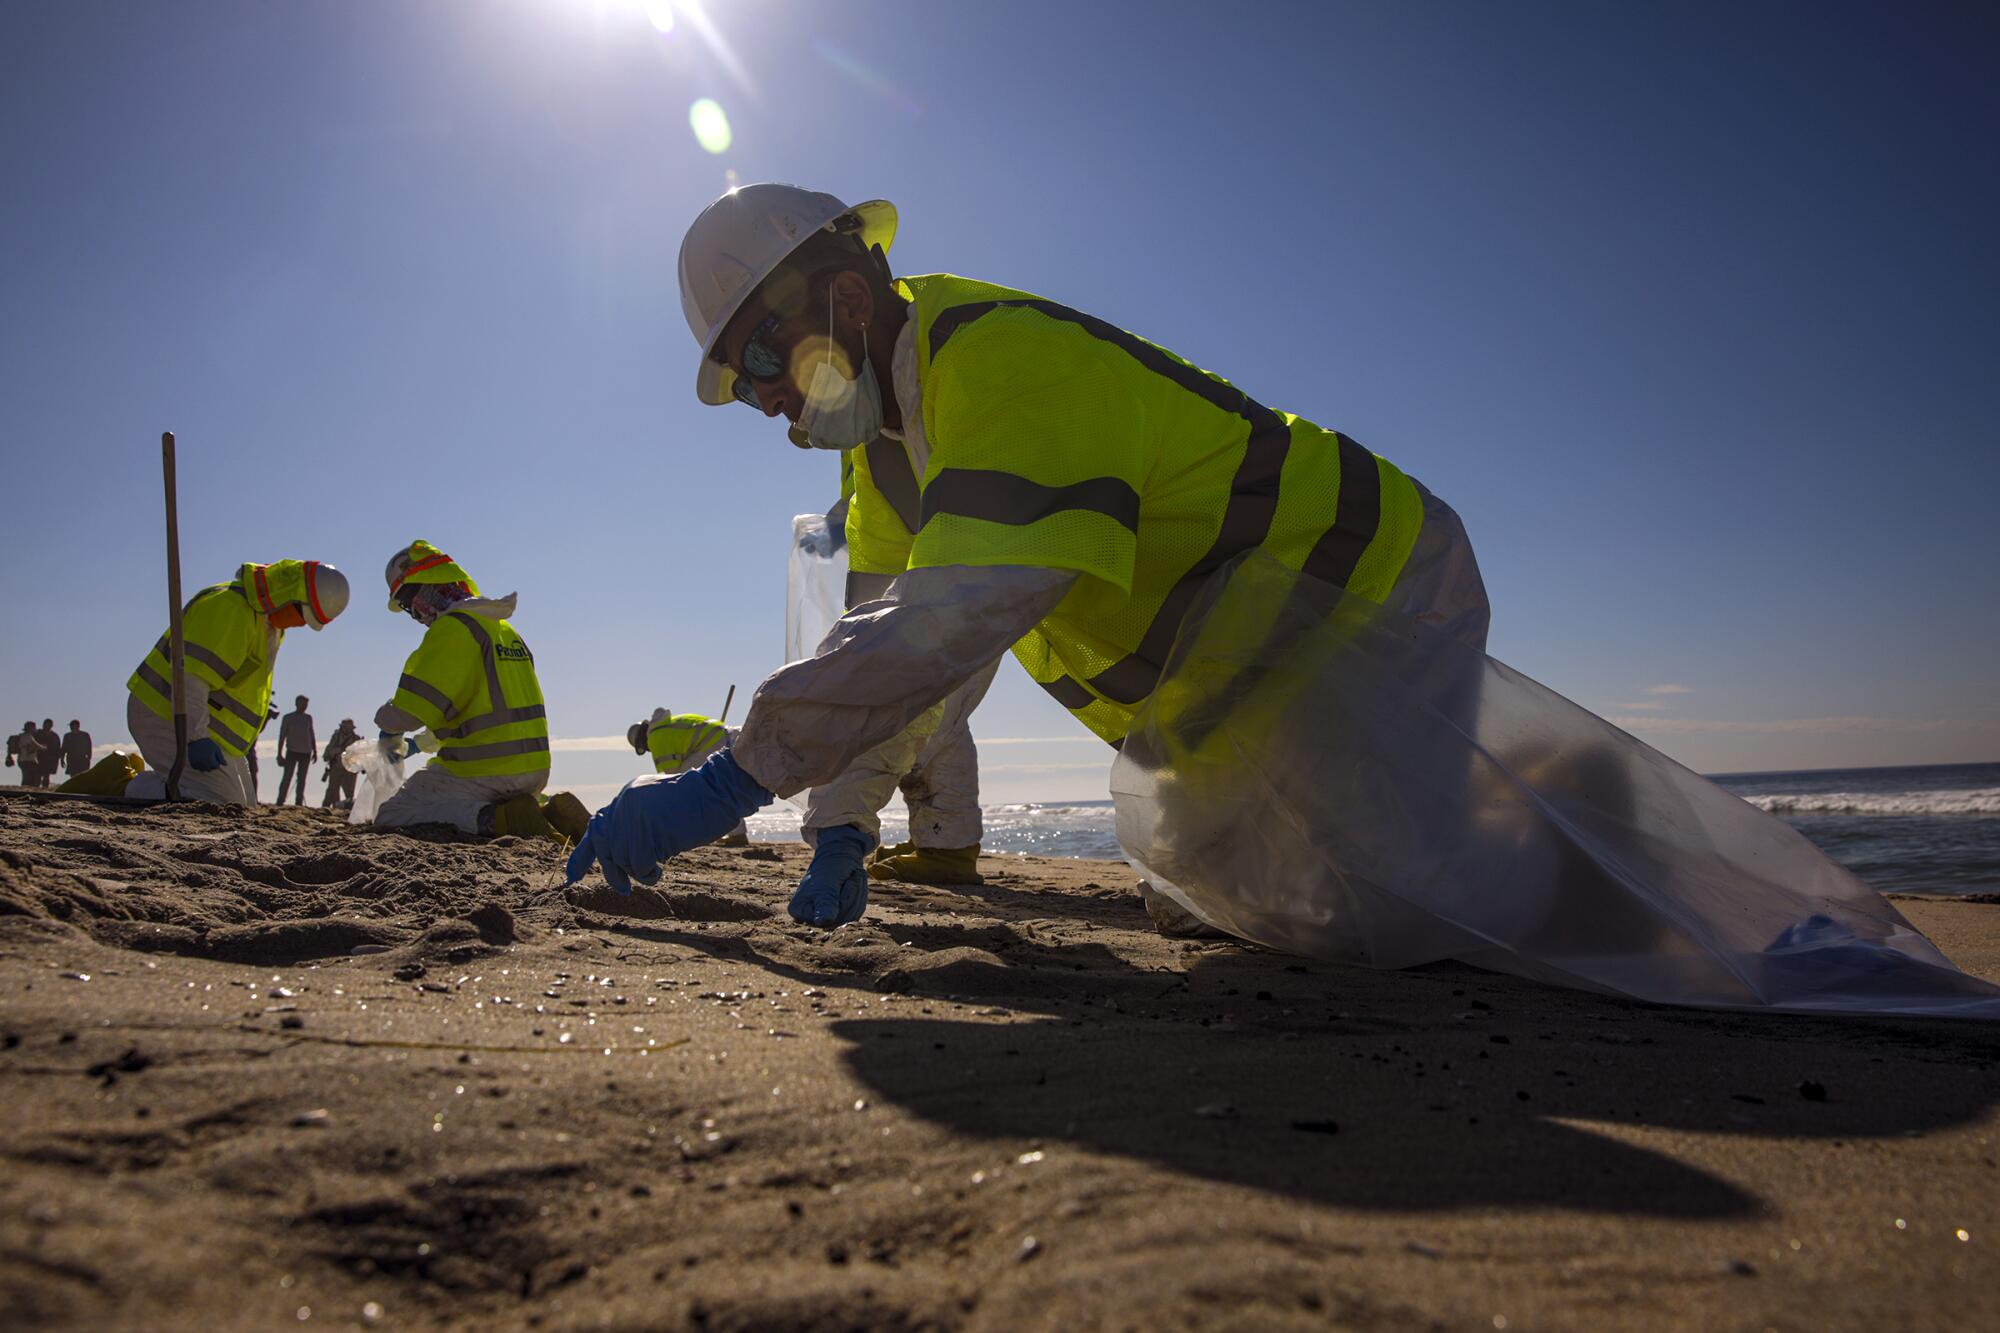 Workers in hats and protective suits are on their knees on a sandy shore 